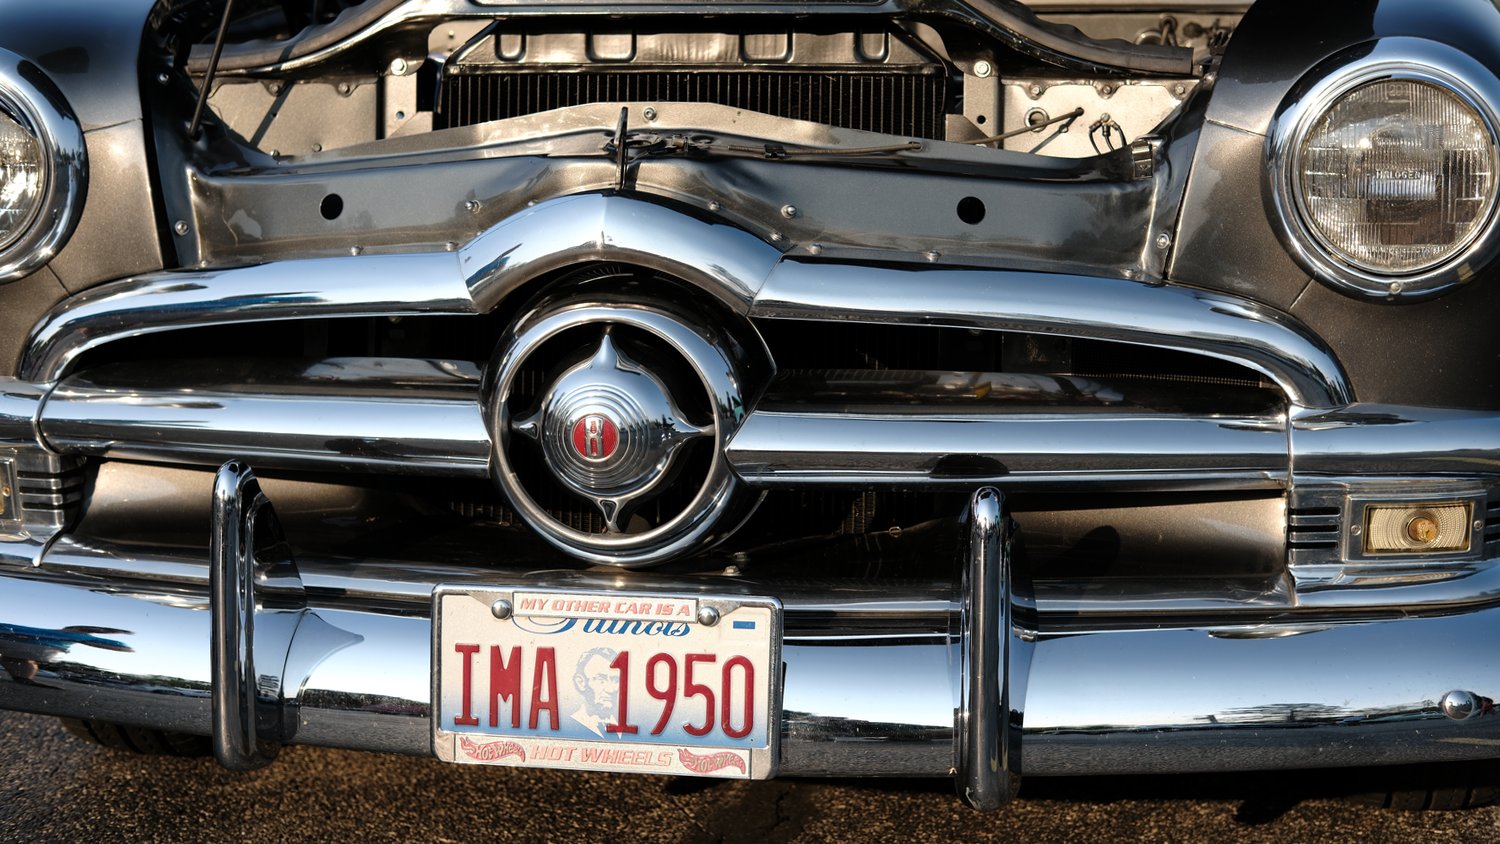 Shiny chrome bumper of the 1950 Ford Custom Deluxe.